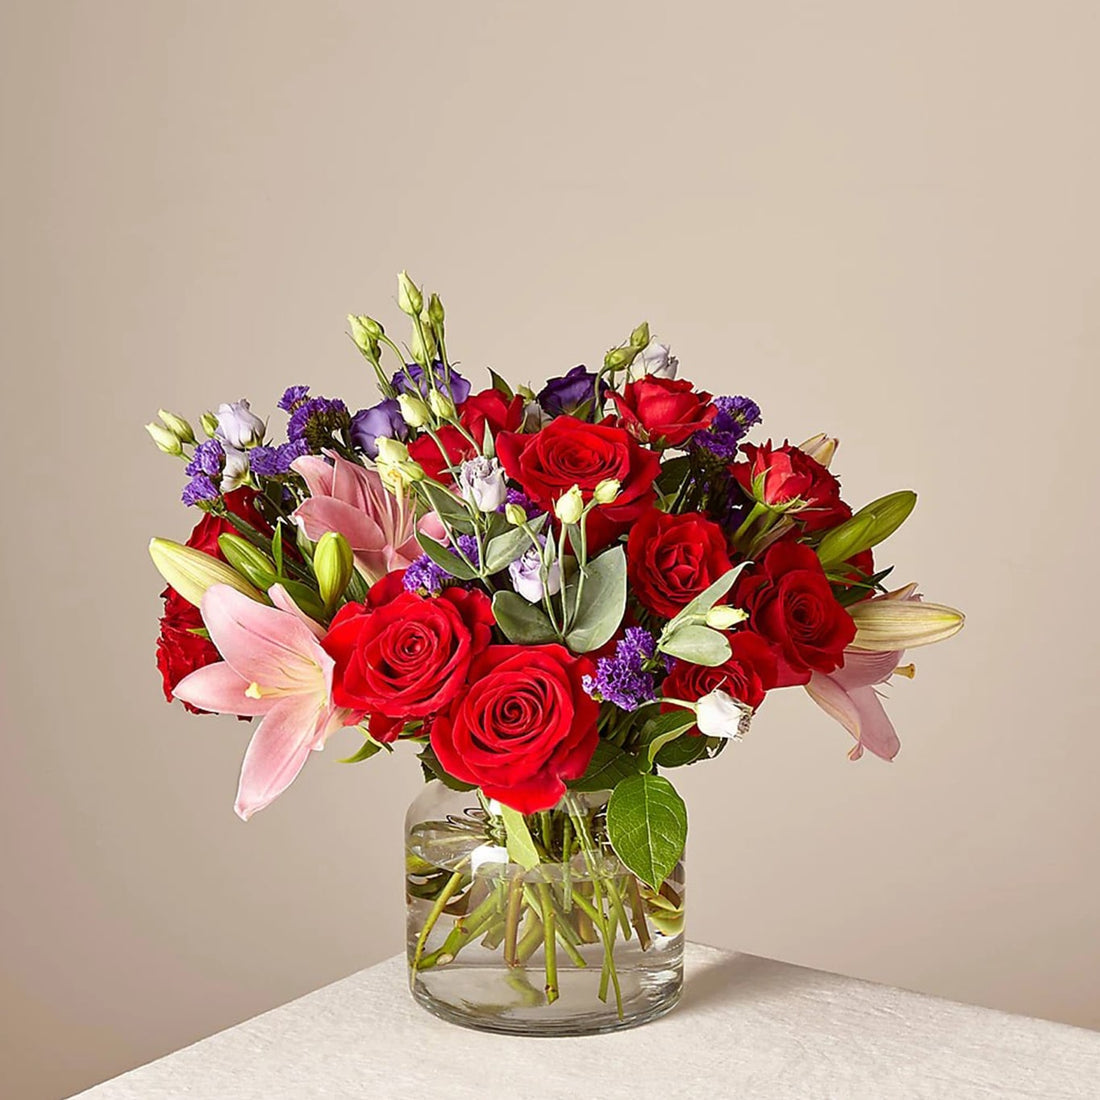 Stunning Love Flowers, Arrangement with roses, lilies, it is a beautiful gift for anniversary, flower gift for birthday, flowers for all occasions and decoration, Fresh Flowers Orlando.